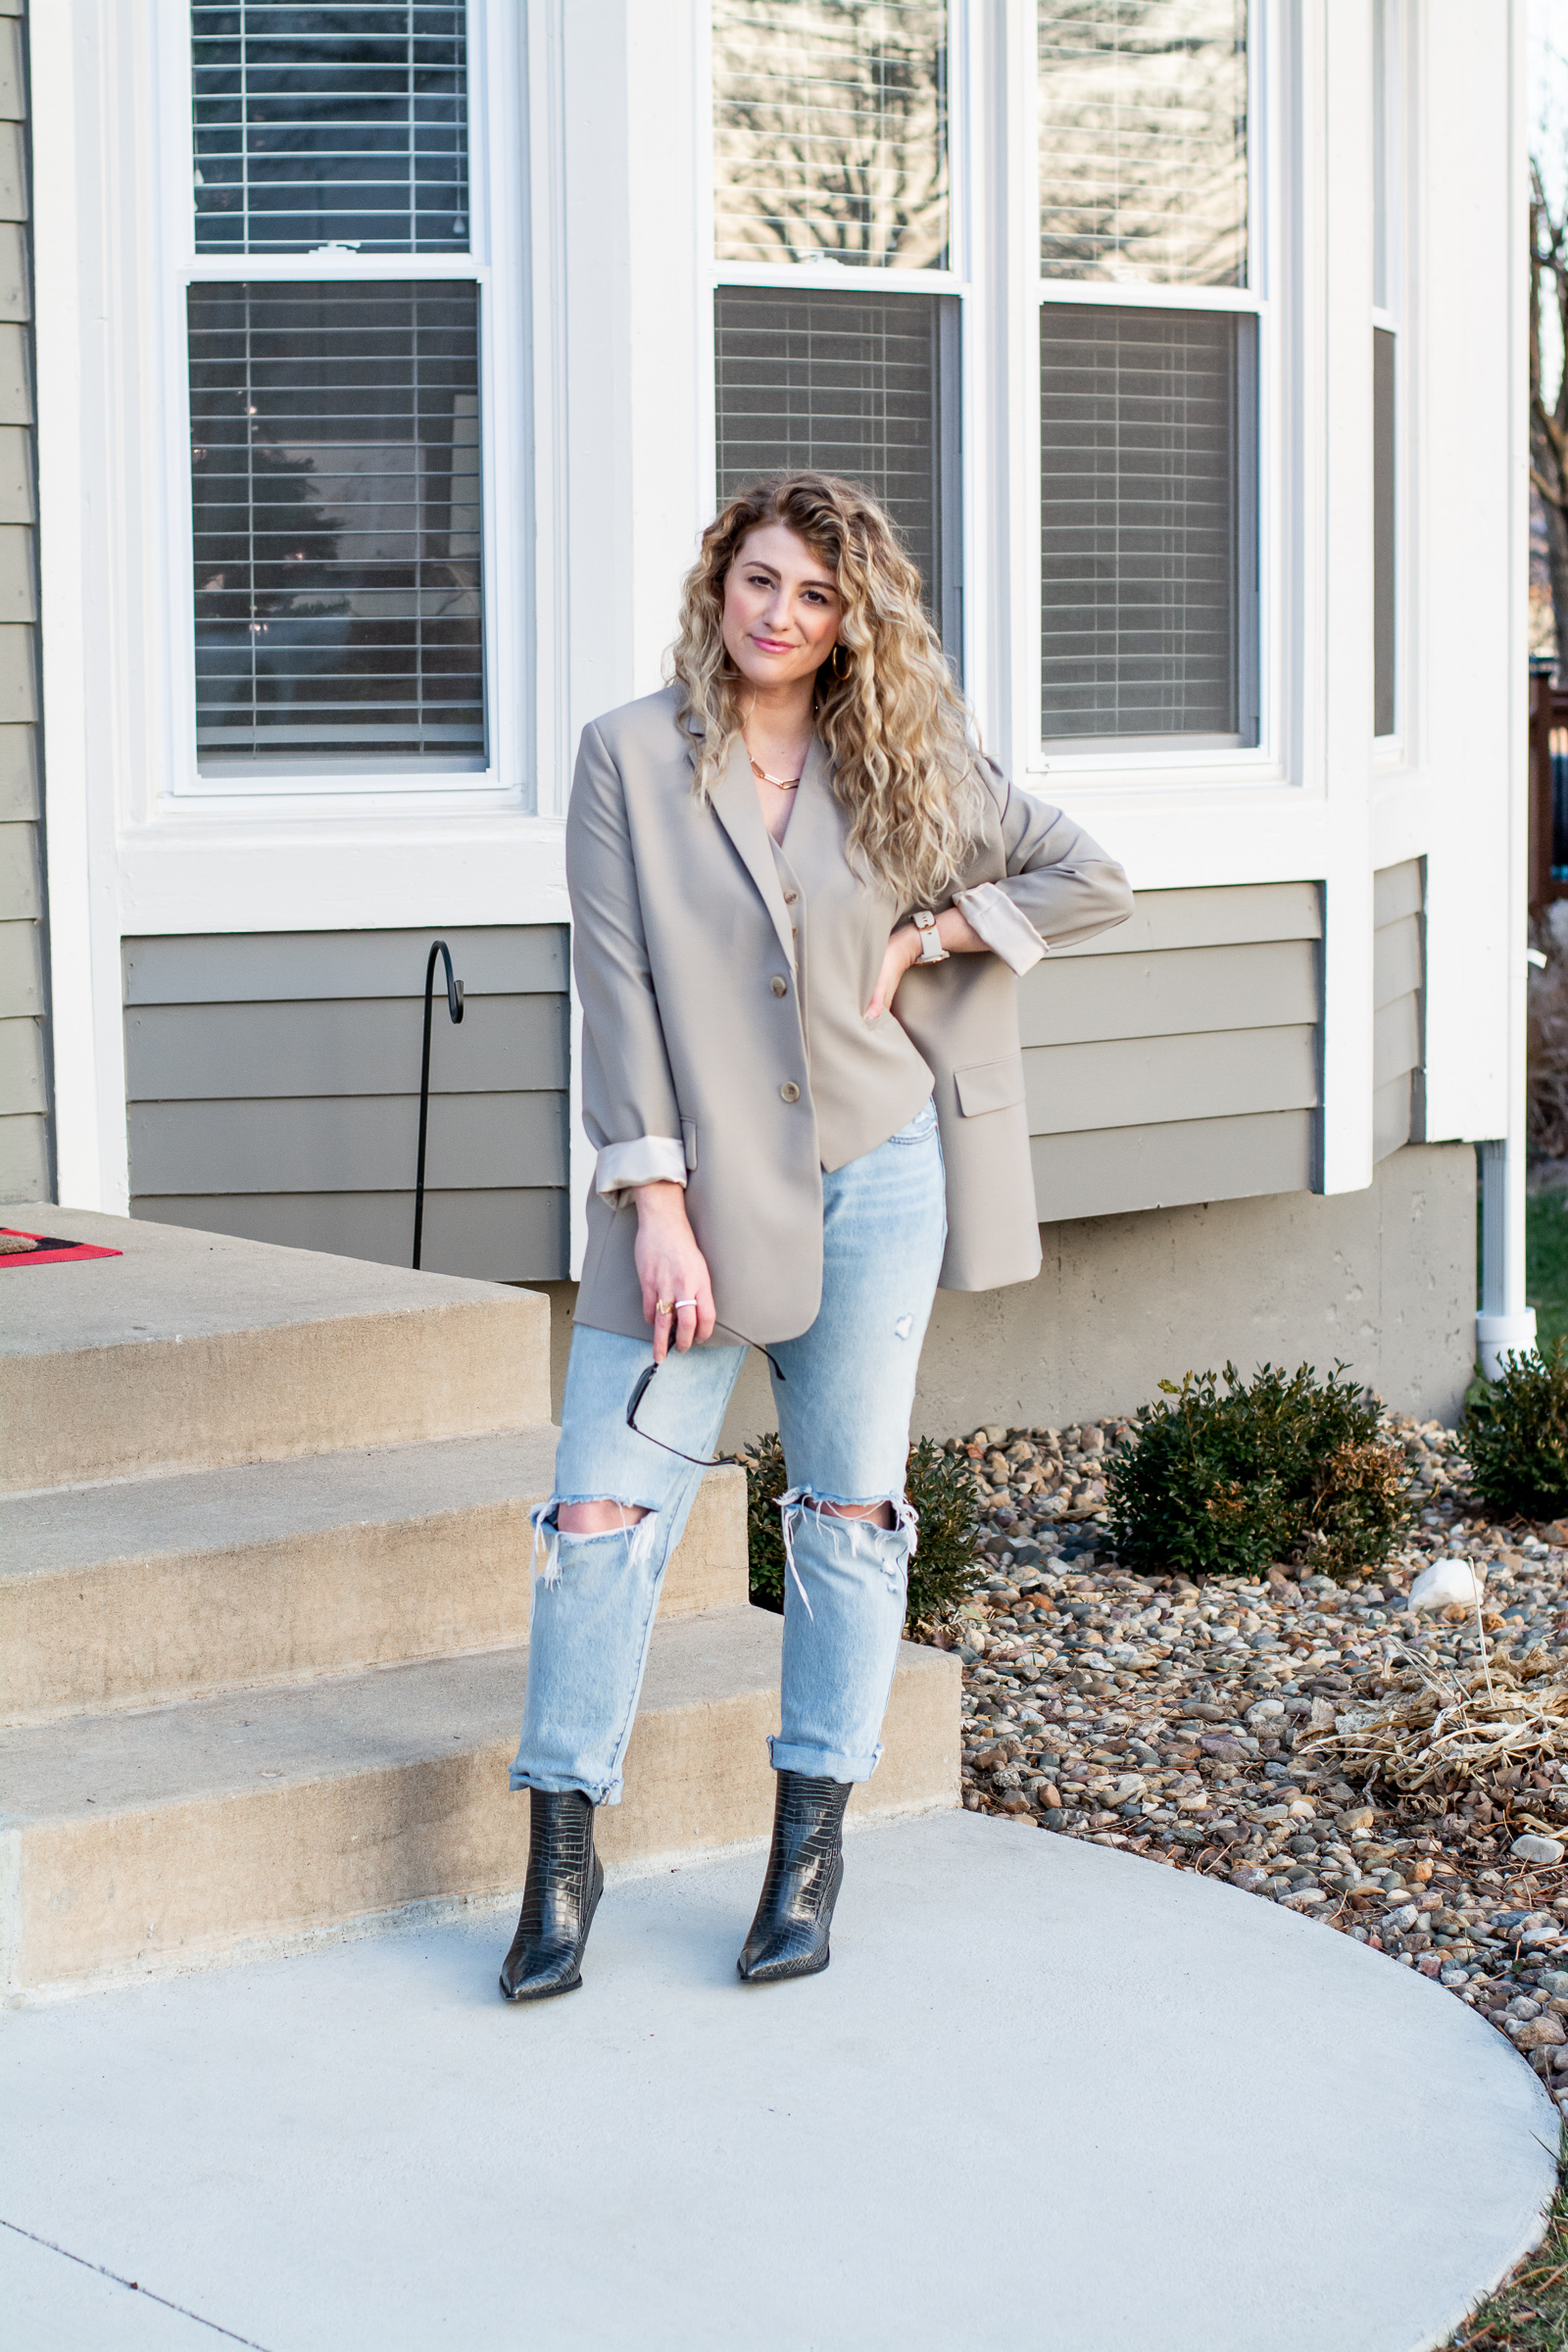 Outfit Idea: Matching Gray Blazer and Vest with Levi's. | LSR